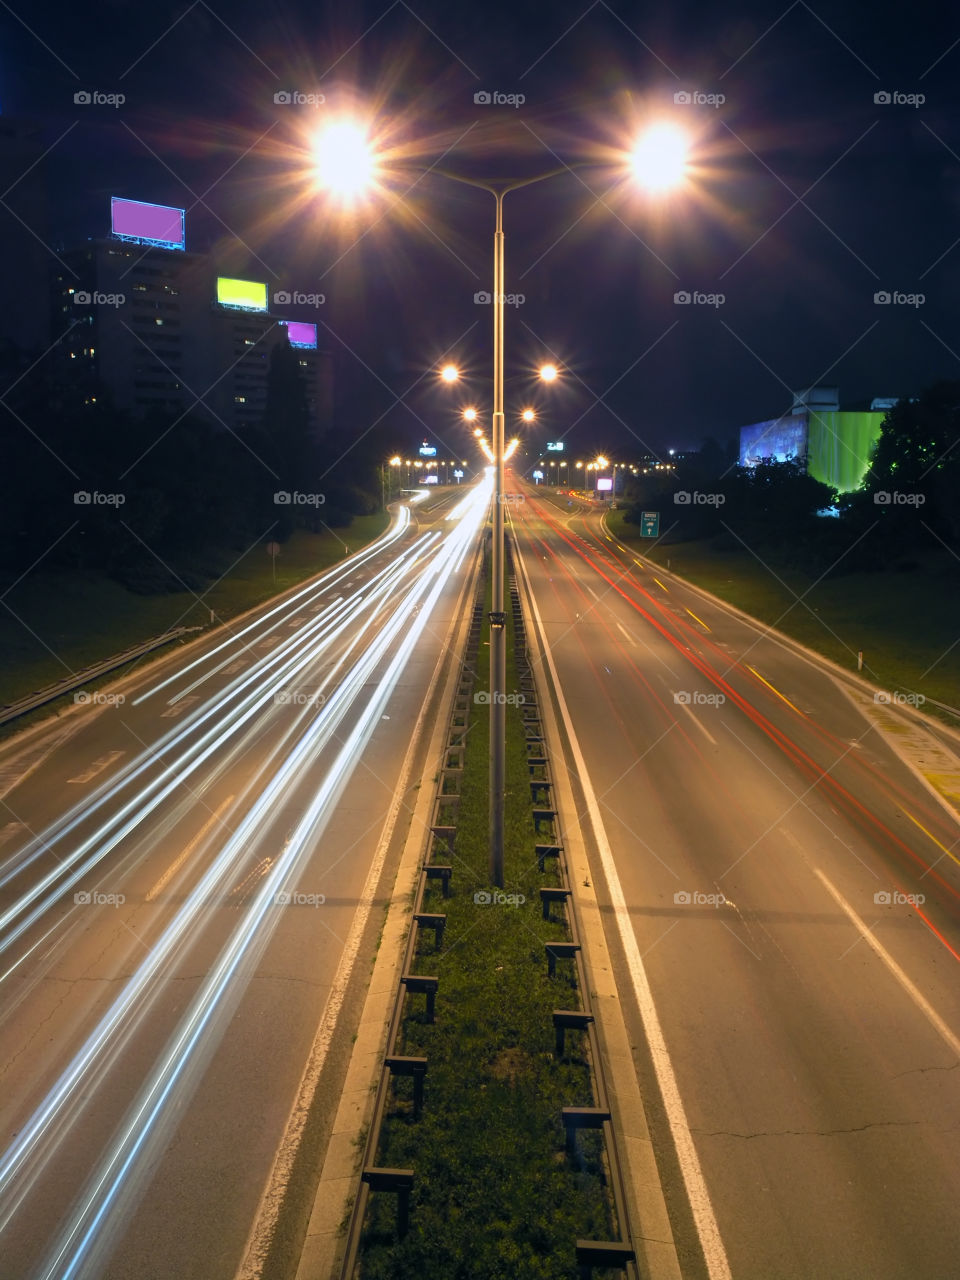 Time lapse and exposure overlay on the highway median